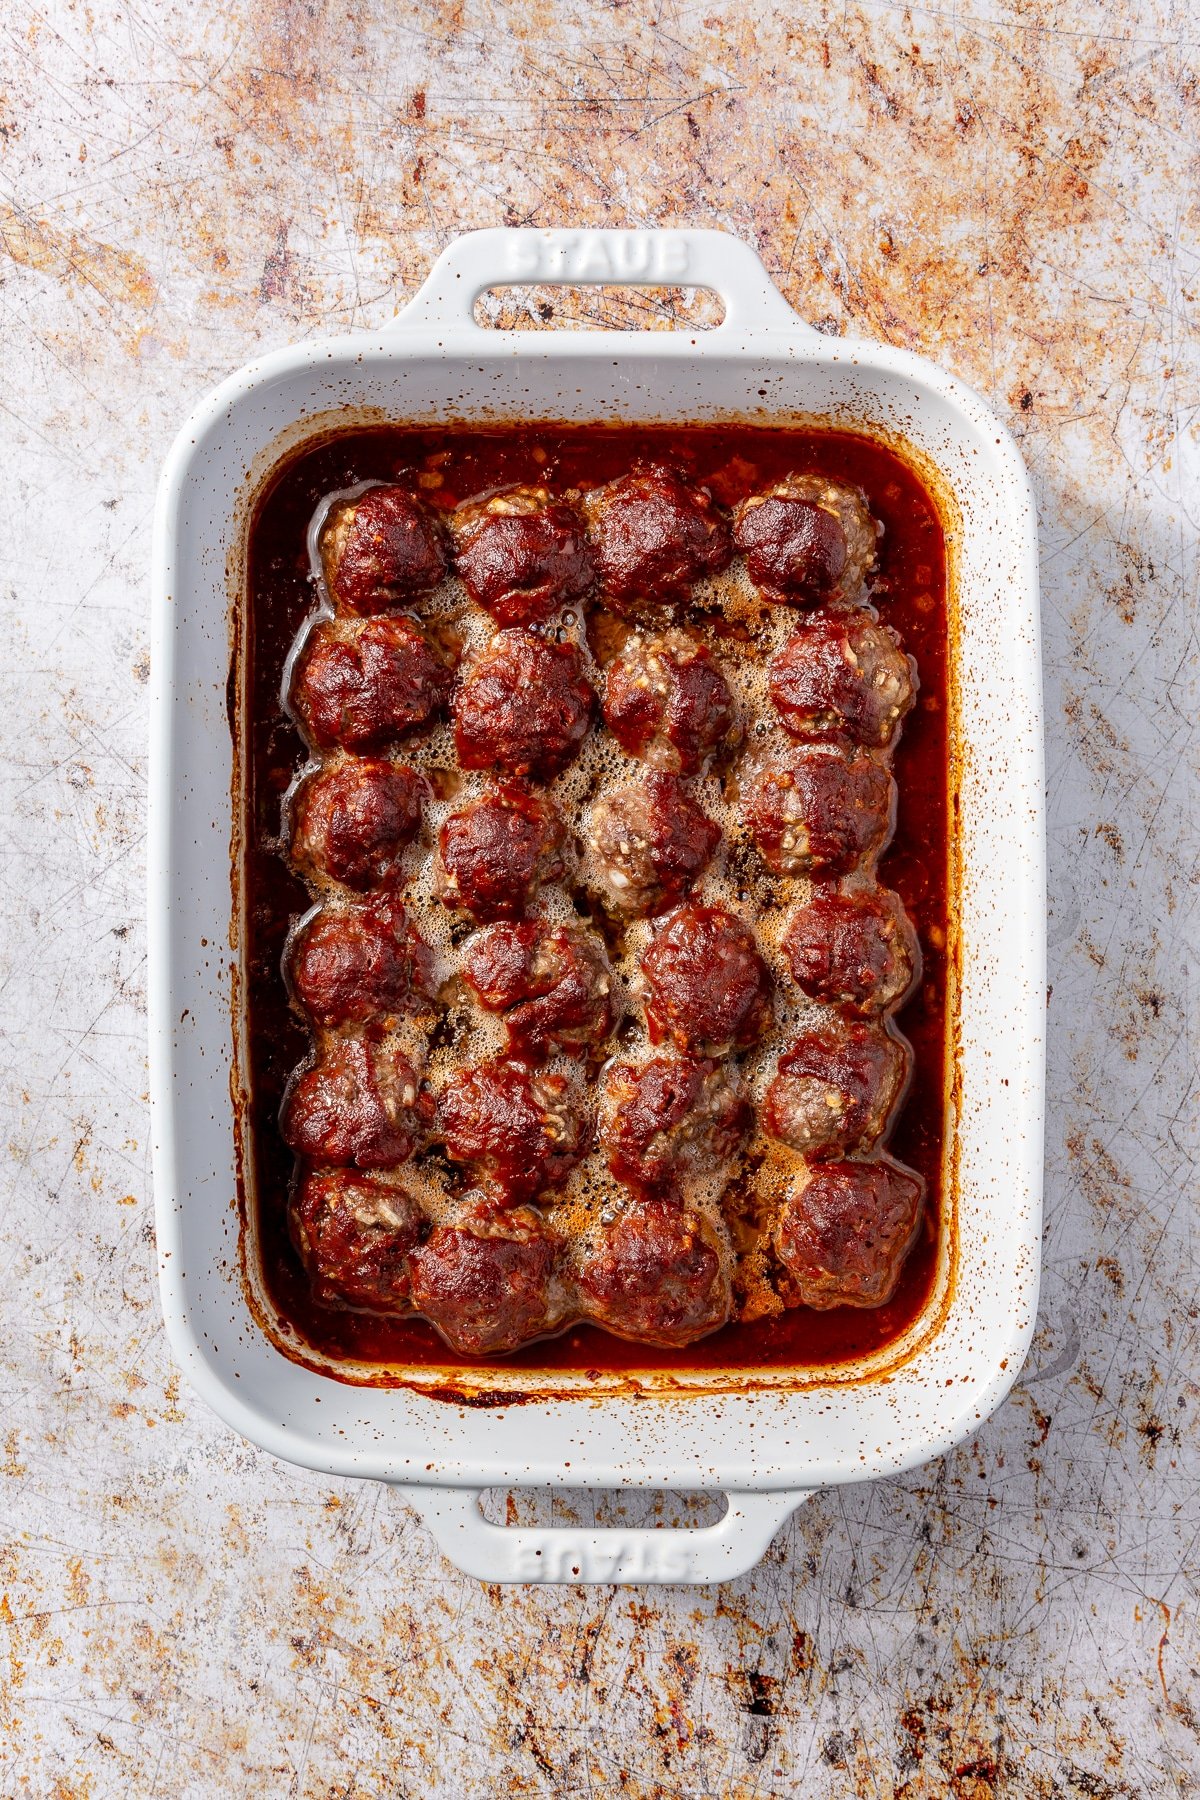 Fully baked meatballs with sauce sit in a white baking dish.